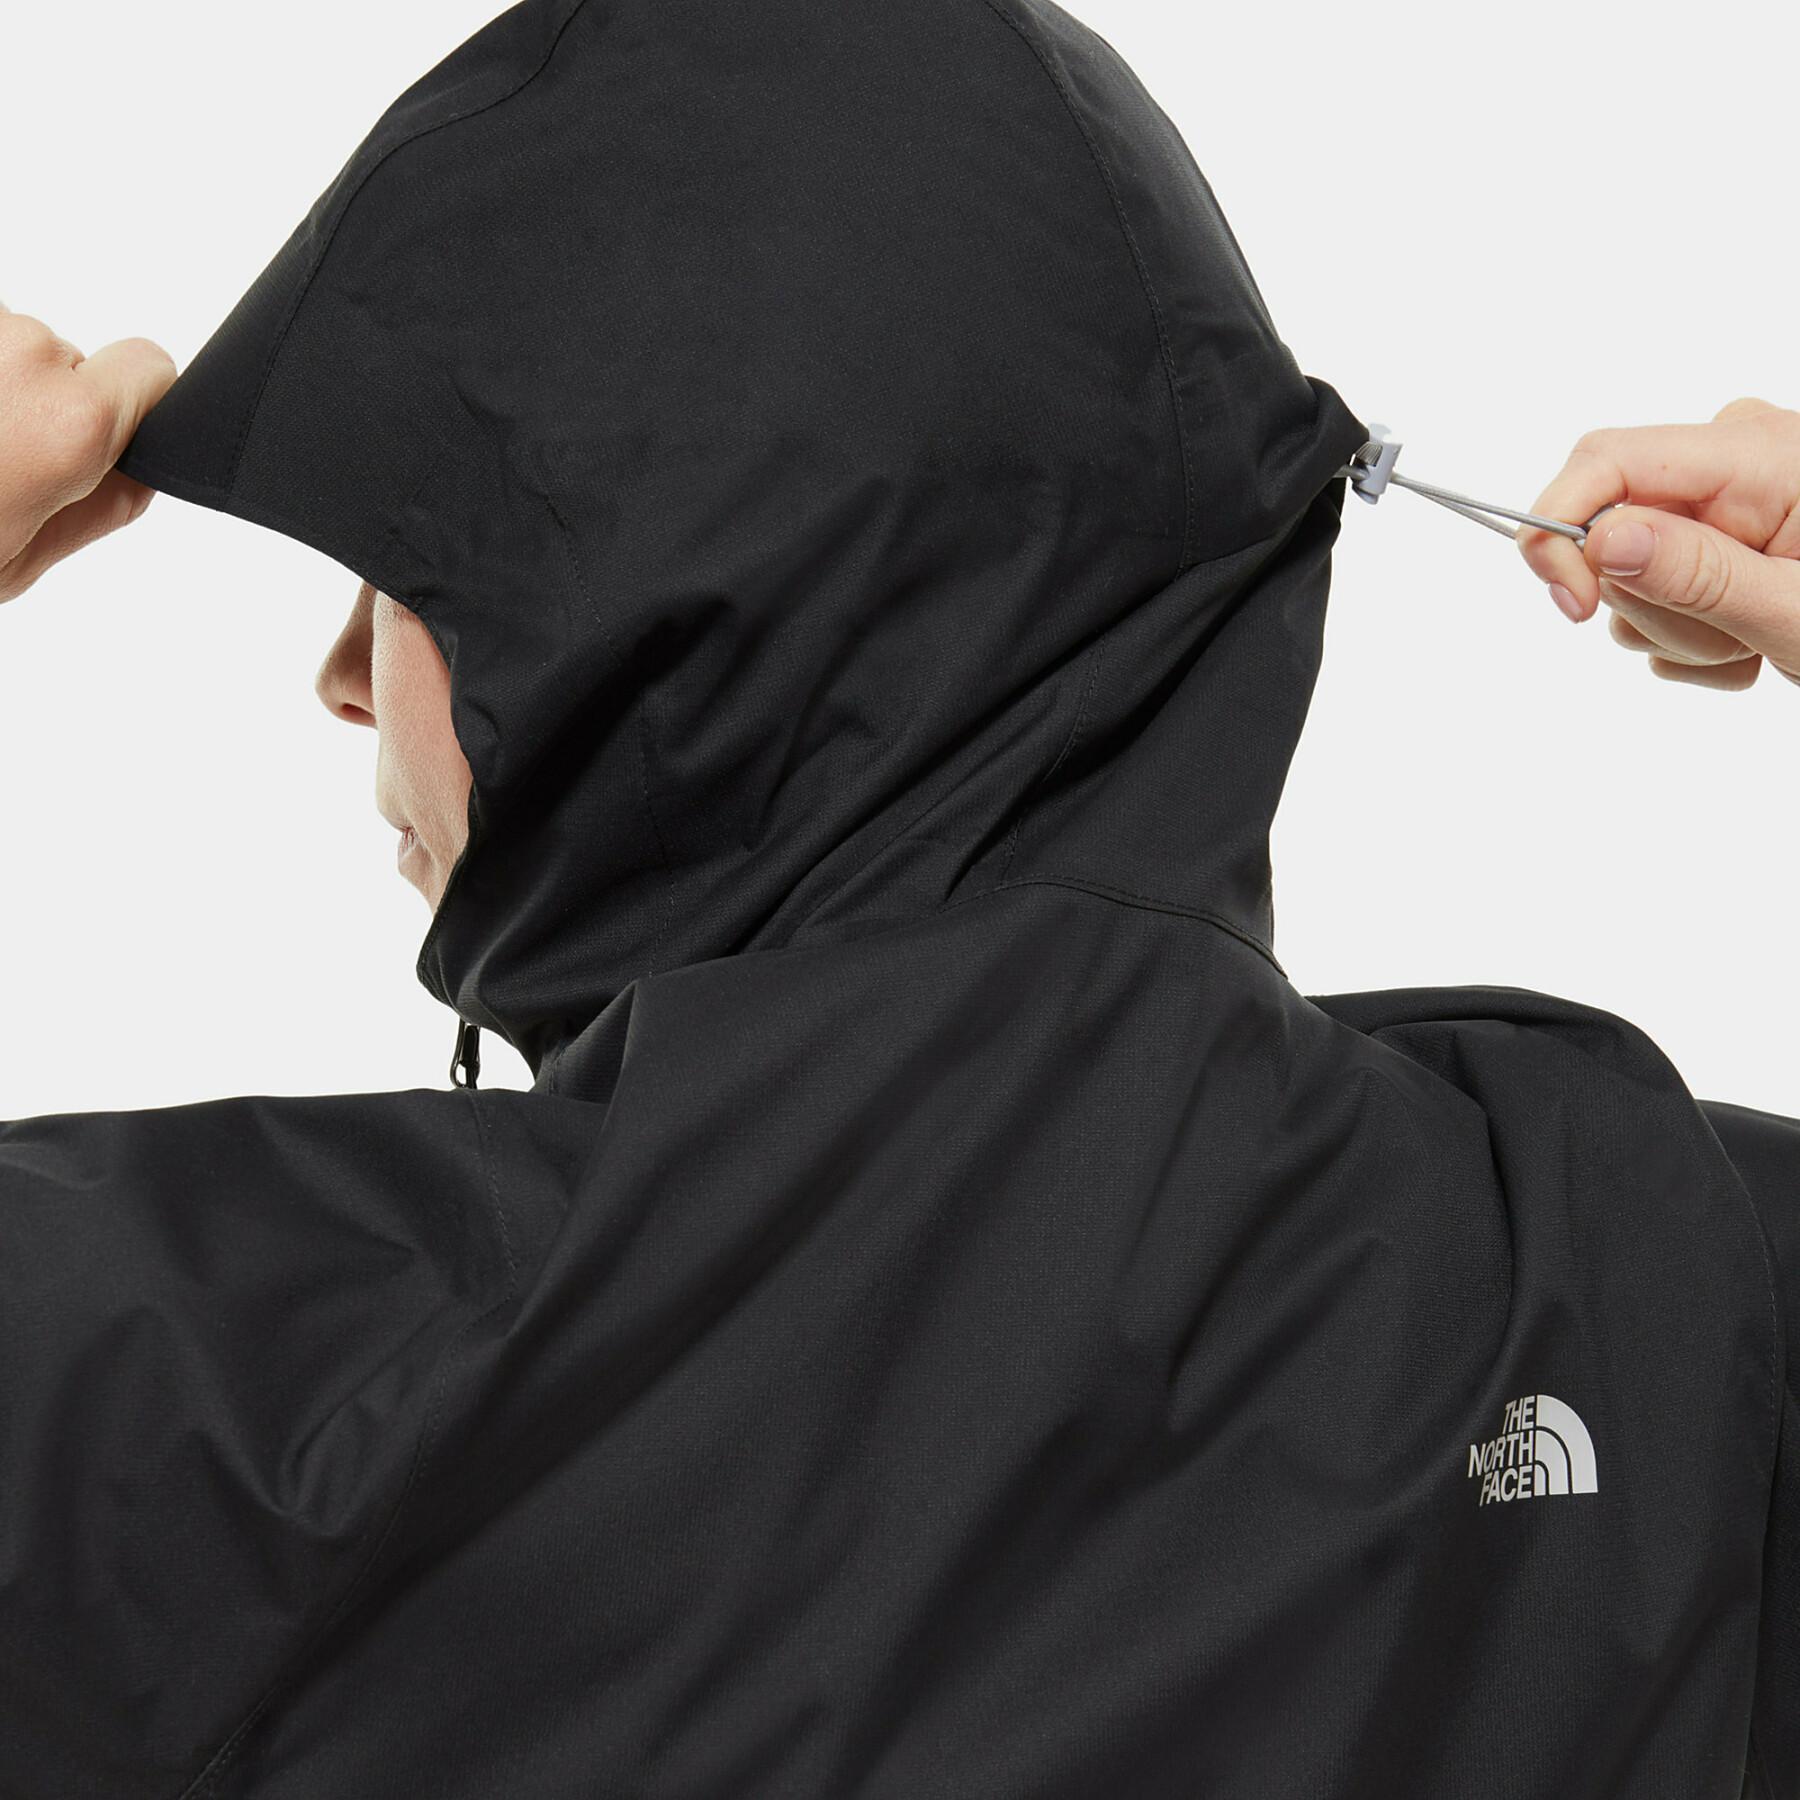 Women's hooded waterproof jacket The North Face Quest